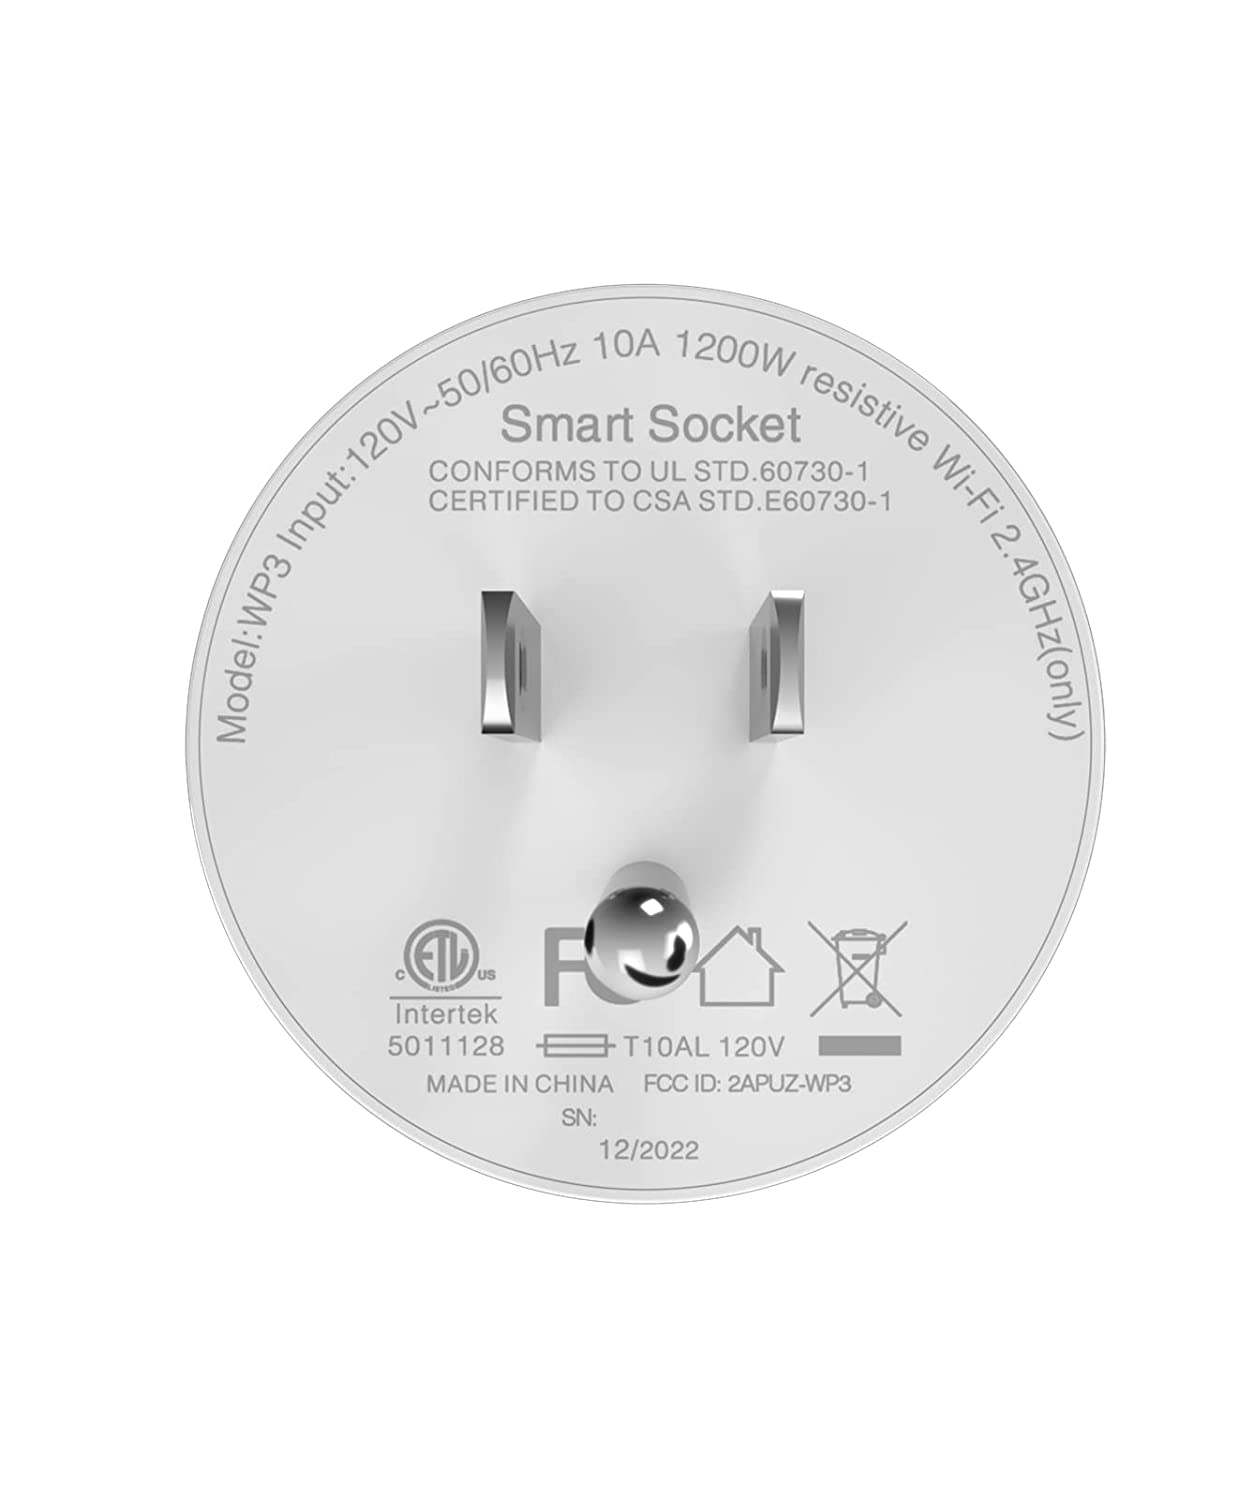 GHome Smart Mini Smart Plug, WiFi Outlet Socket Works with Alexa and Google Home, Remote Control with Timer Function, Only Supports 2.4GHz Network, No Hub Required, ETL FCC Listed (4 Pack)...